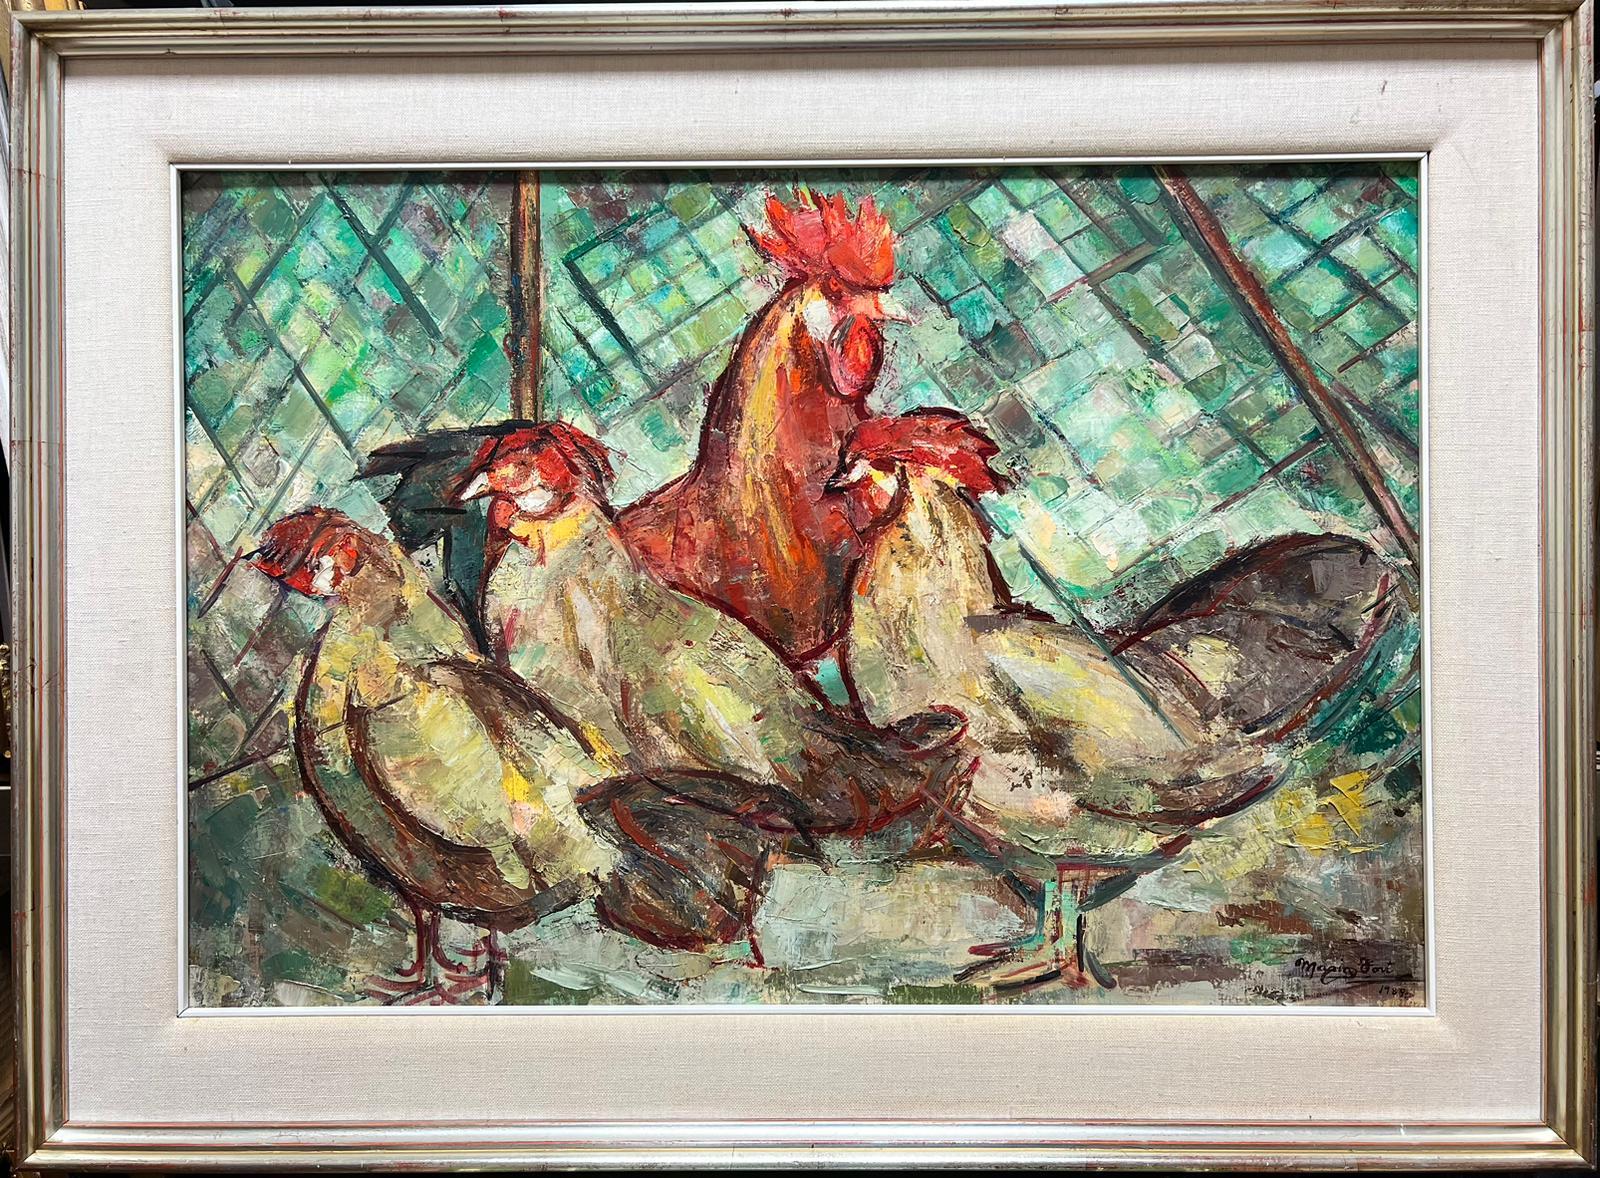 Chickens
by Maria Tort Xirau (Catalan, 1924-2018)
signed lower corner
dated 1989
oil painting on canvas, framed

framed: 24 x 34 inches
canvas: 19 x 28 inches

Very good condition. 

Provenance: private collection

Maria Tort Xirau ( Figueres , 26